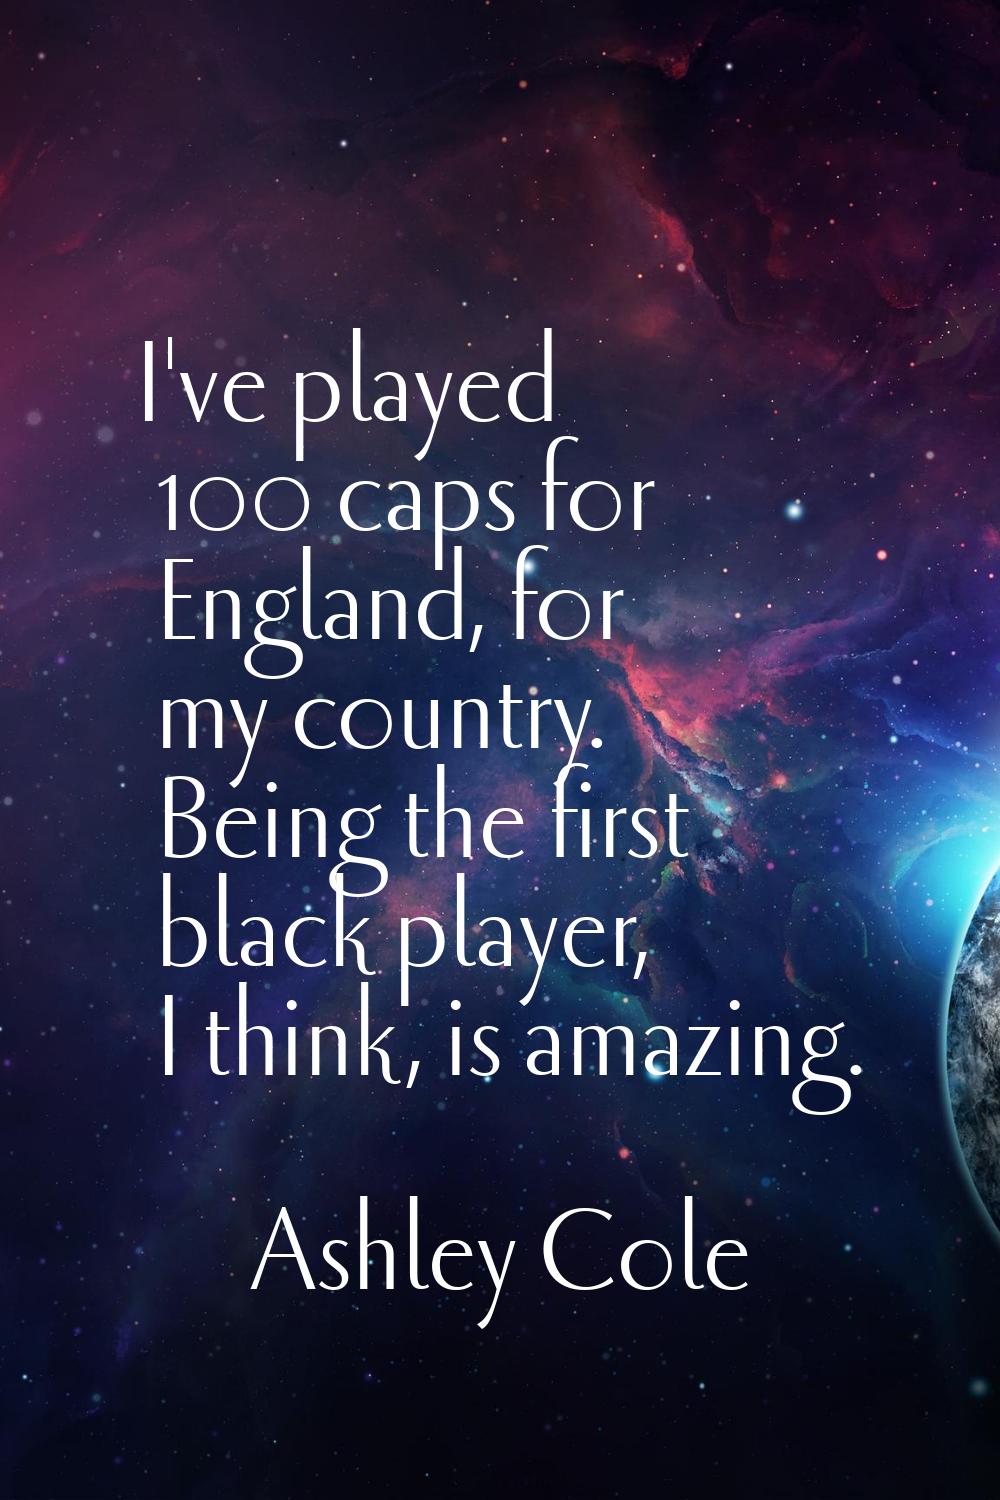 I've played 100 caps for England, for my country. Being the first black player, I think, is amazing